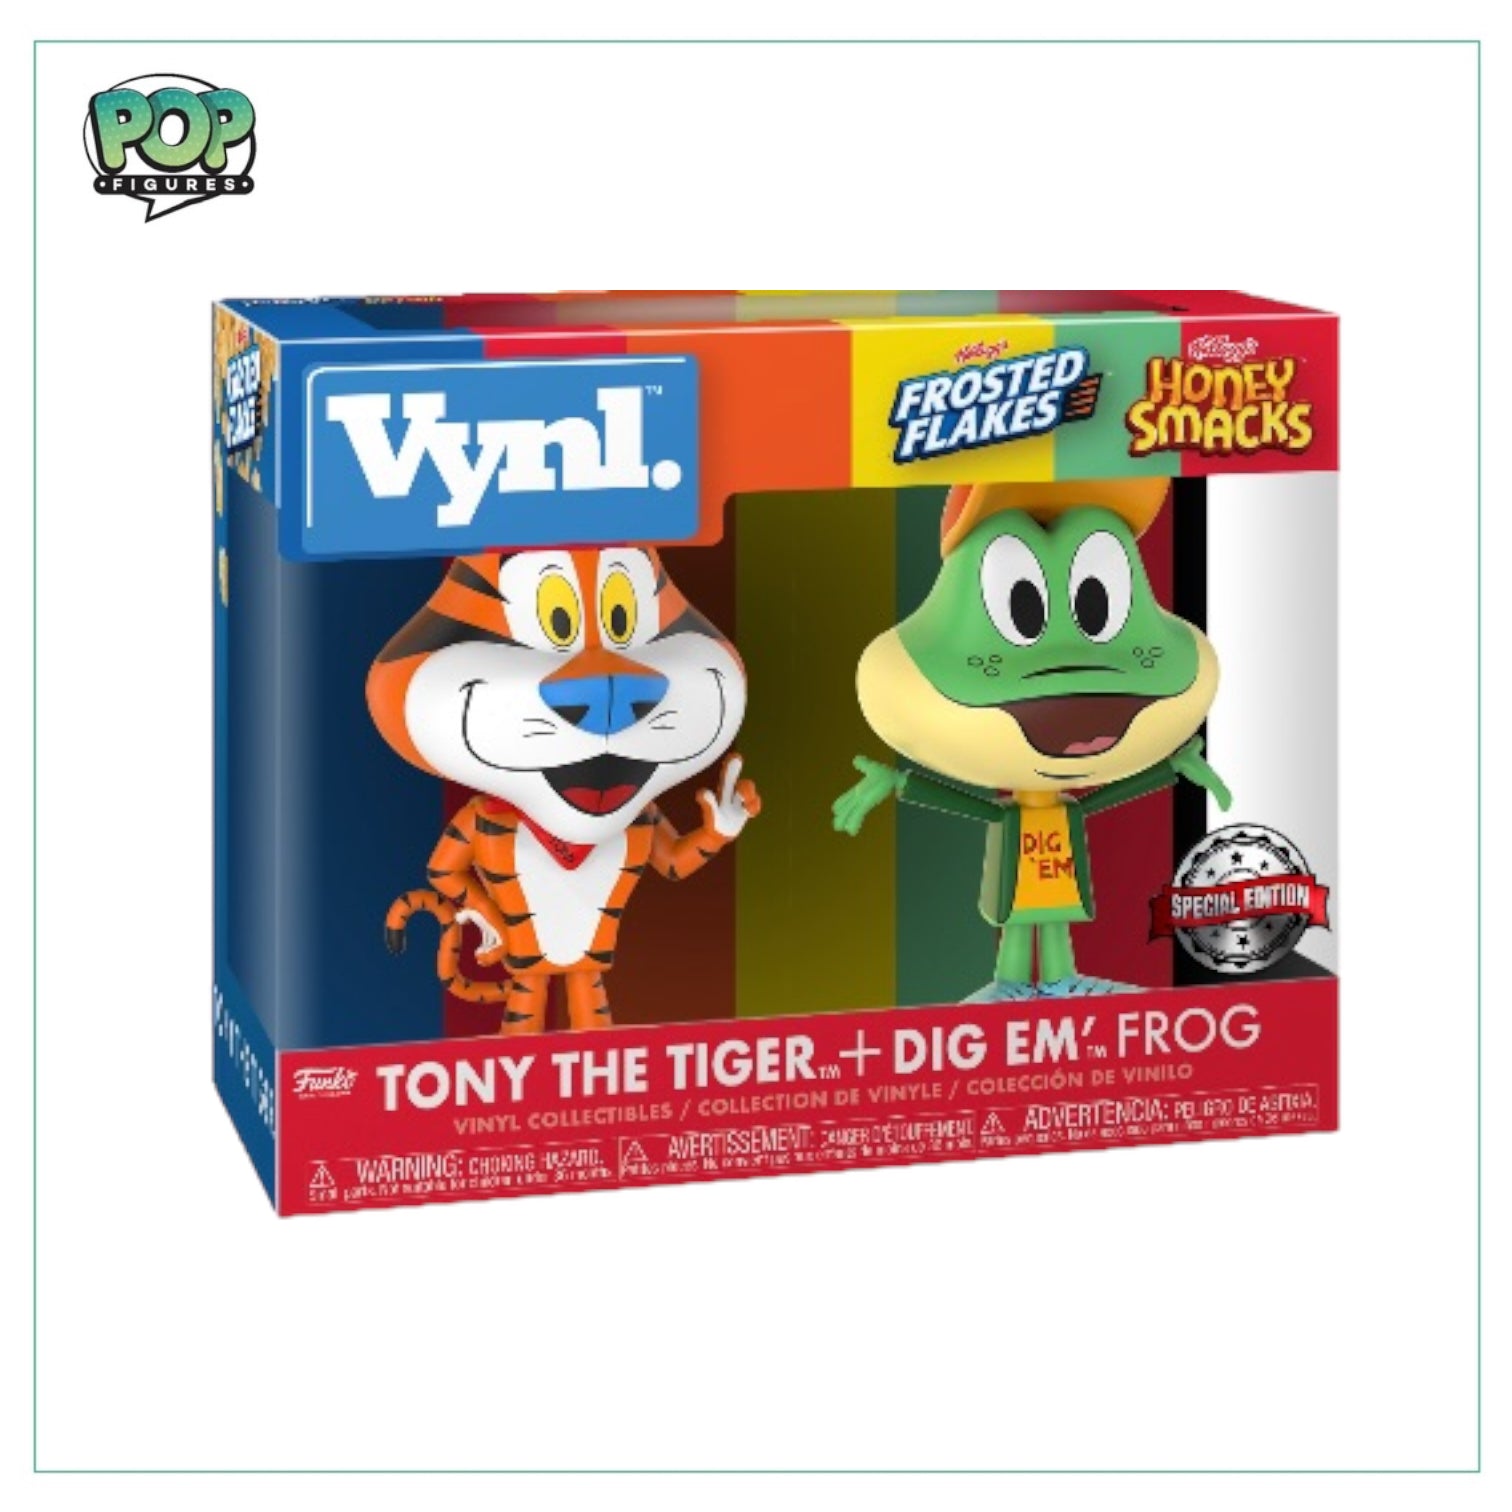 Tony the Tiger & Dig Em’ Frog 2 Pack Funko Vynl! - Frosted Flakes - Special Edition